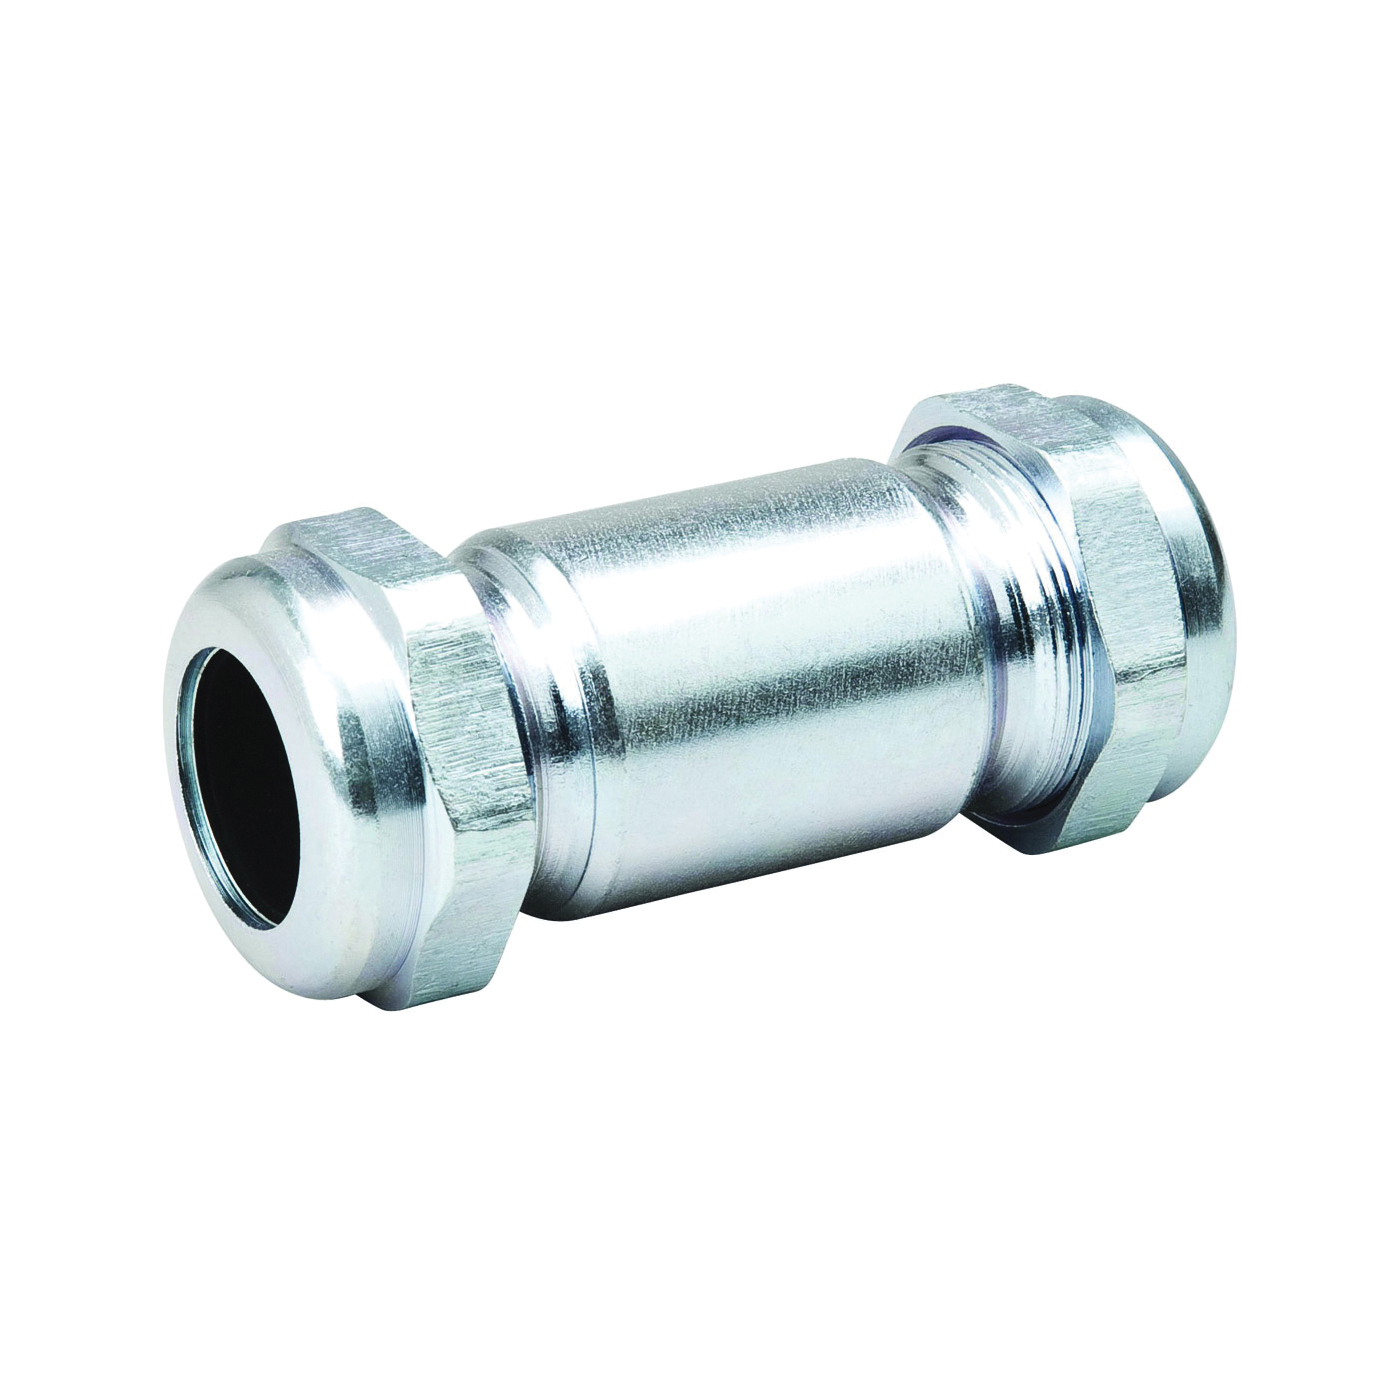 160-003HC Pipe Coupling, 1/2 in, Compression x IPS, 125 psi Pressure